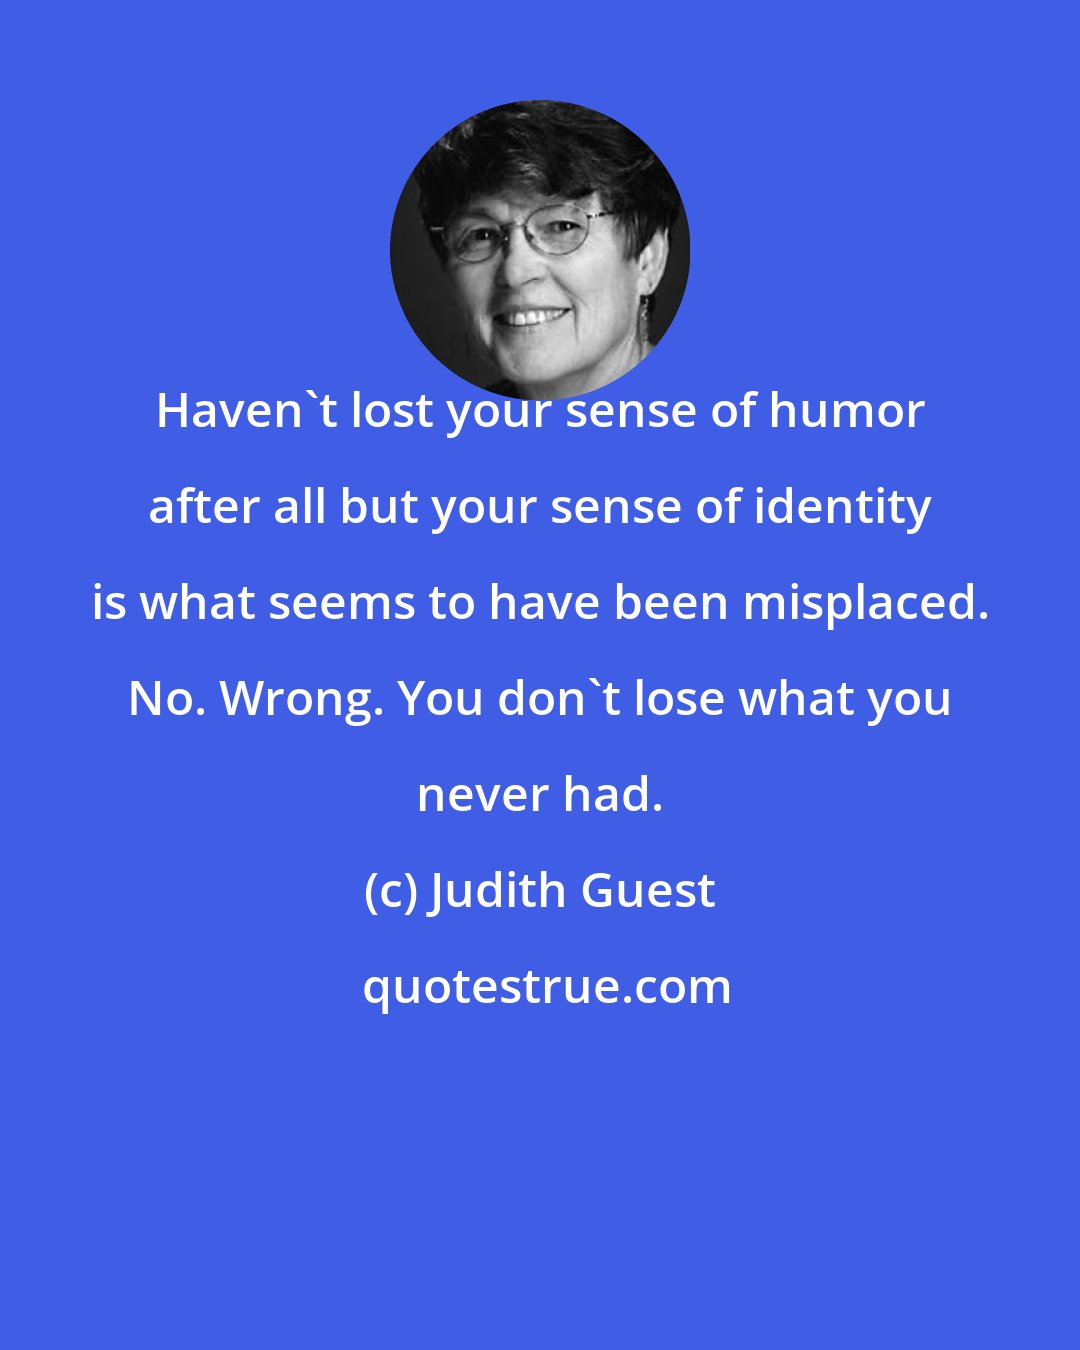 Judith Guest: Haven't lost your sense of humor after all but your sense of identity is what seems to have been misplaced. No. Wrong. You don't lose what you never had.